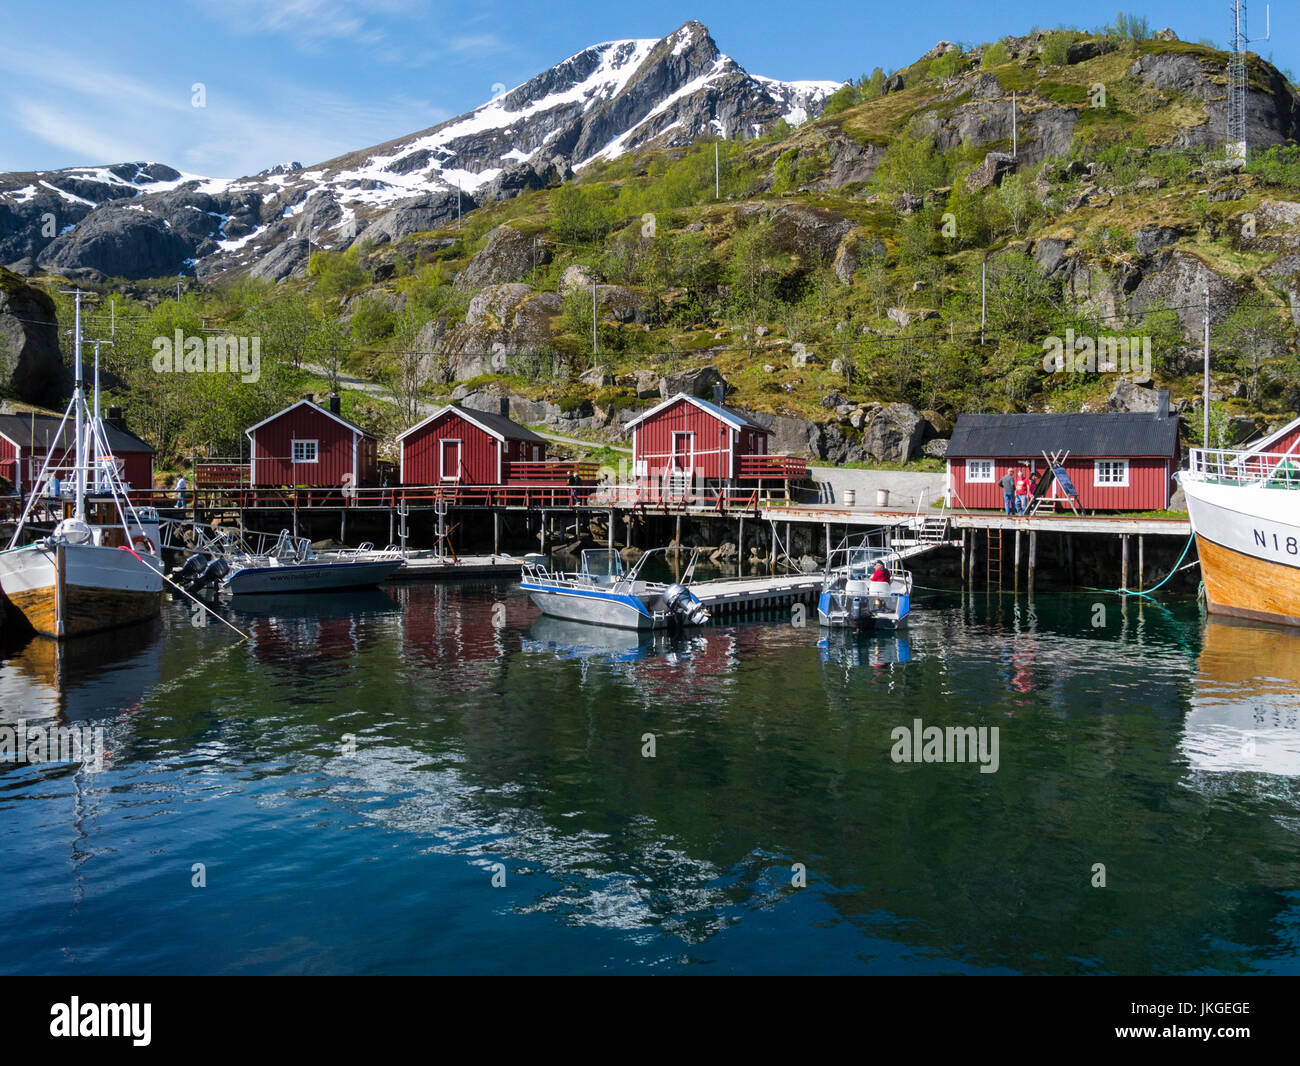 Nusfjord harbour in old preserved fishing village now a museum and holiday resort Flakstadøy one of main islands of Lofoten archipelago Norway Stock Photo